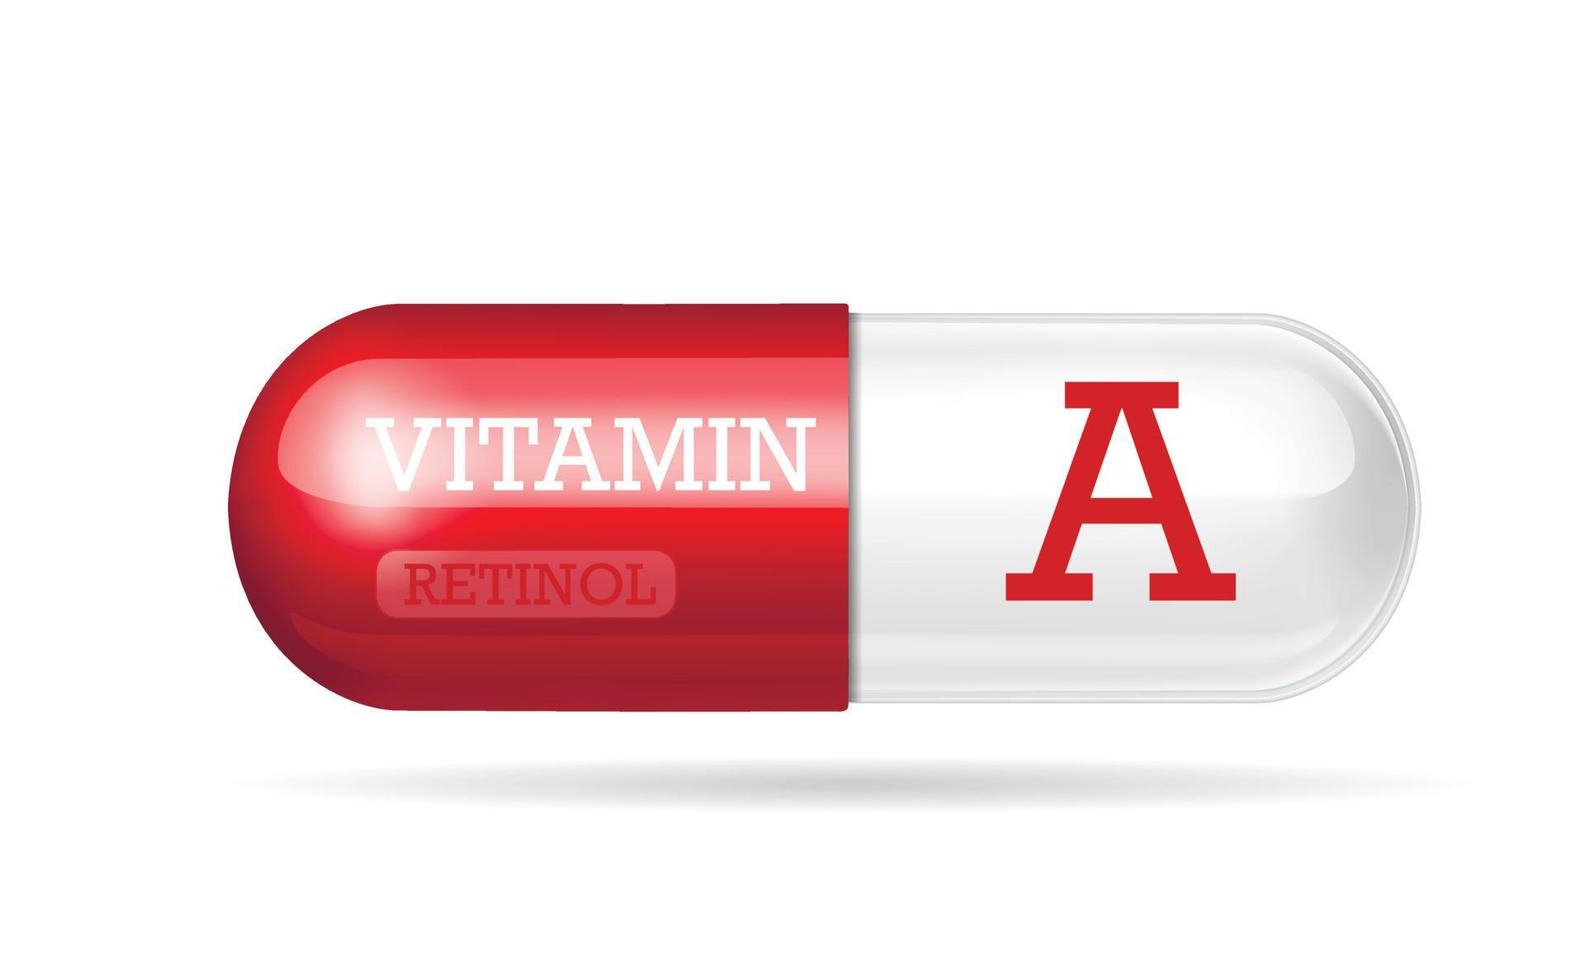 Vitamin A, two-tone red-white capsule, tablets, dietary supplement, on a white background. Vector illustration